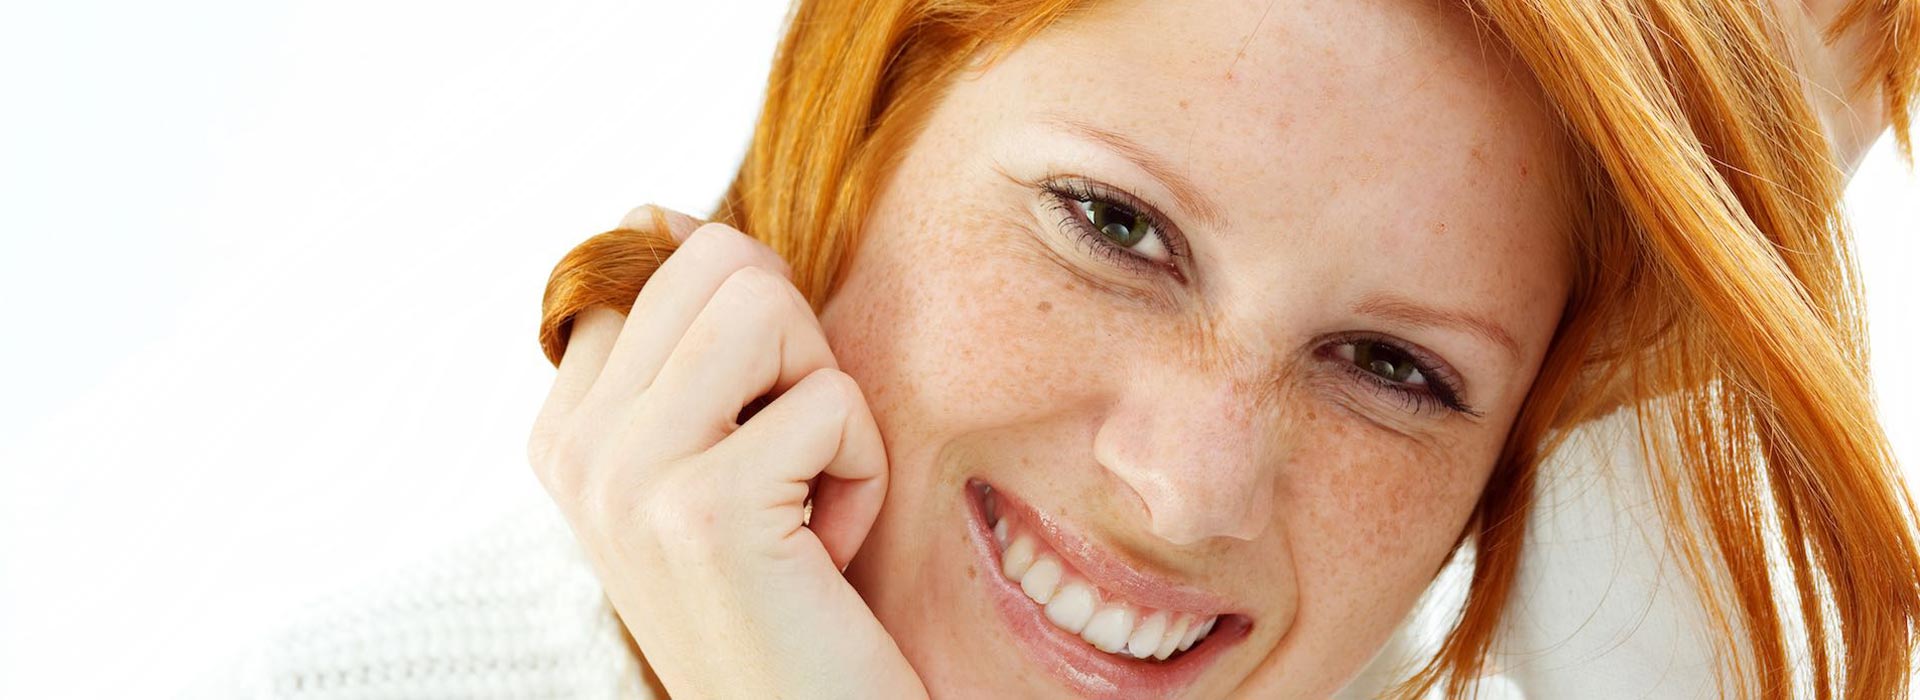 women with smiling face